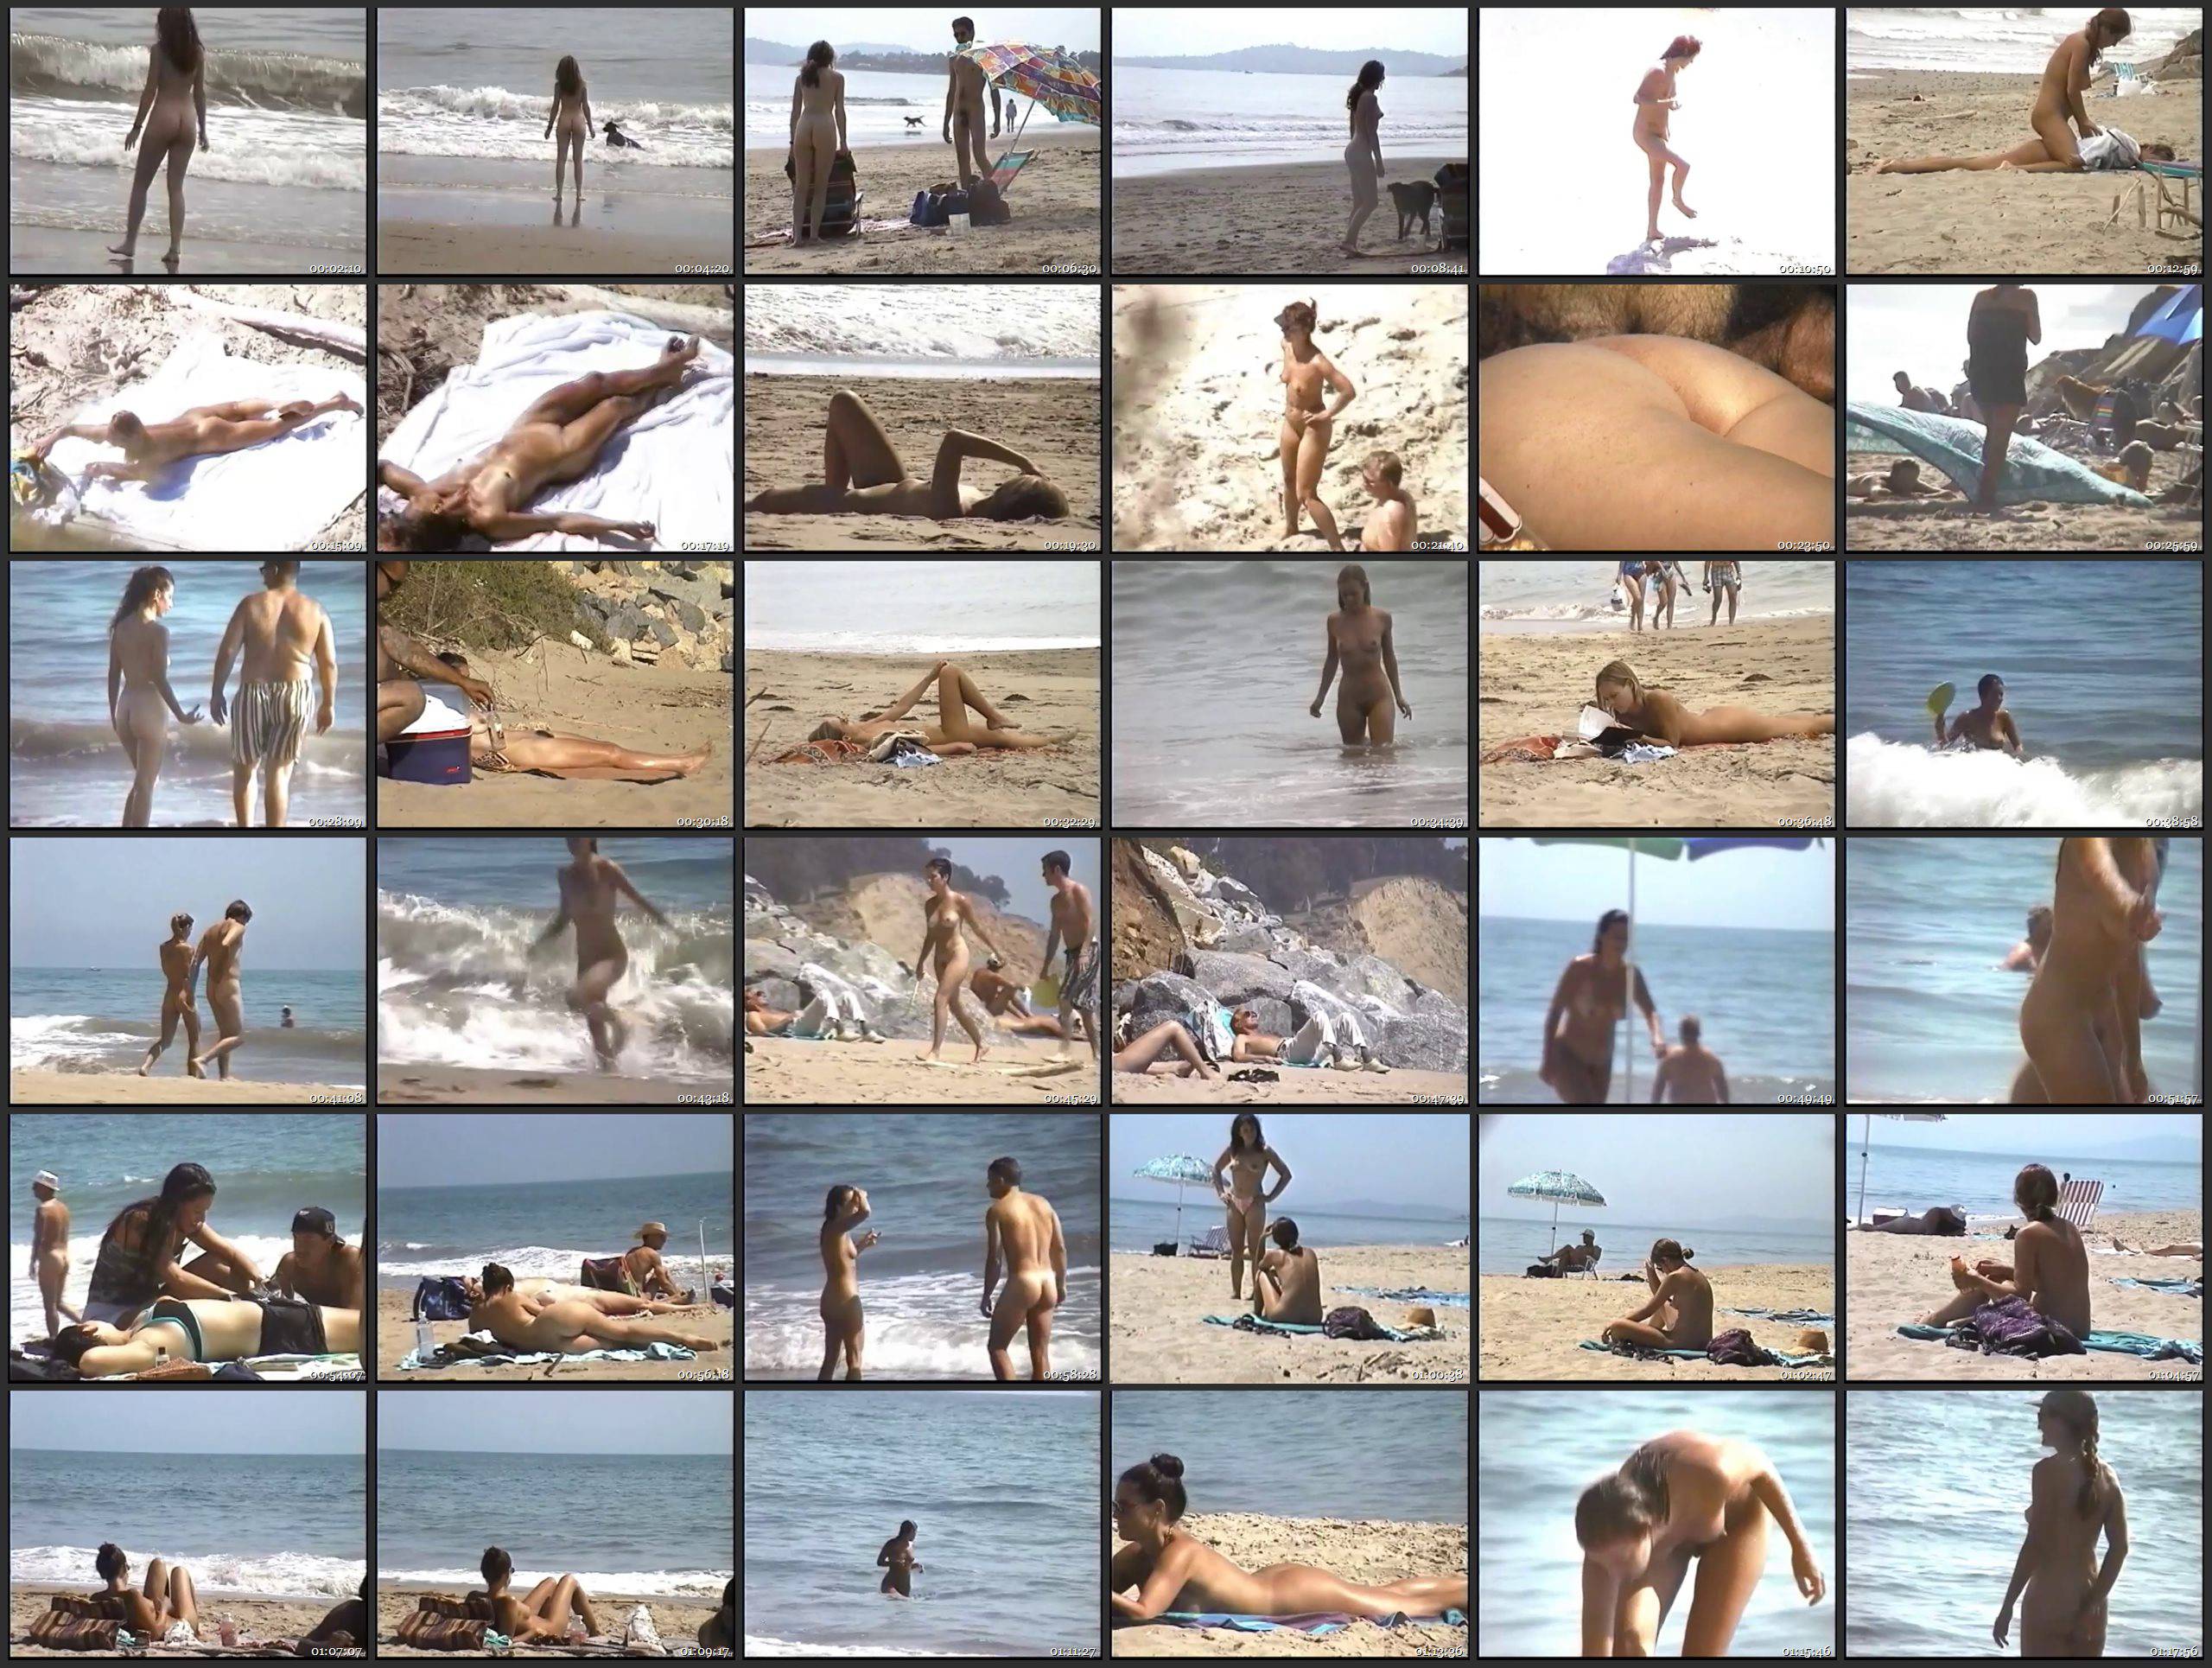 Other Nudist Videos Brads California Dreamers 2 - Thumbnails